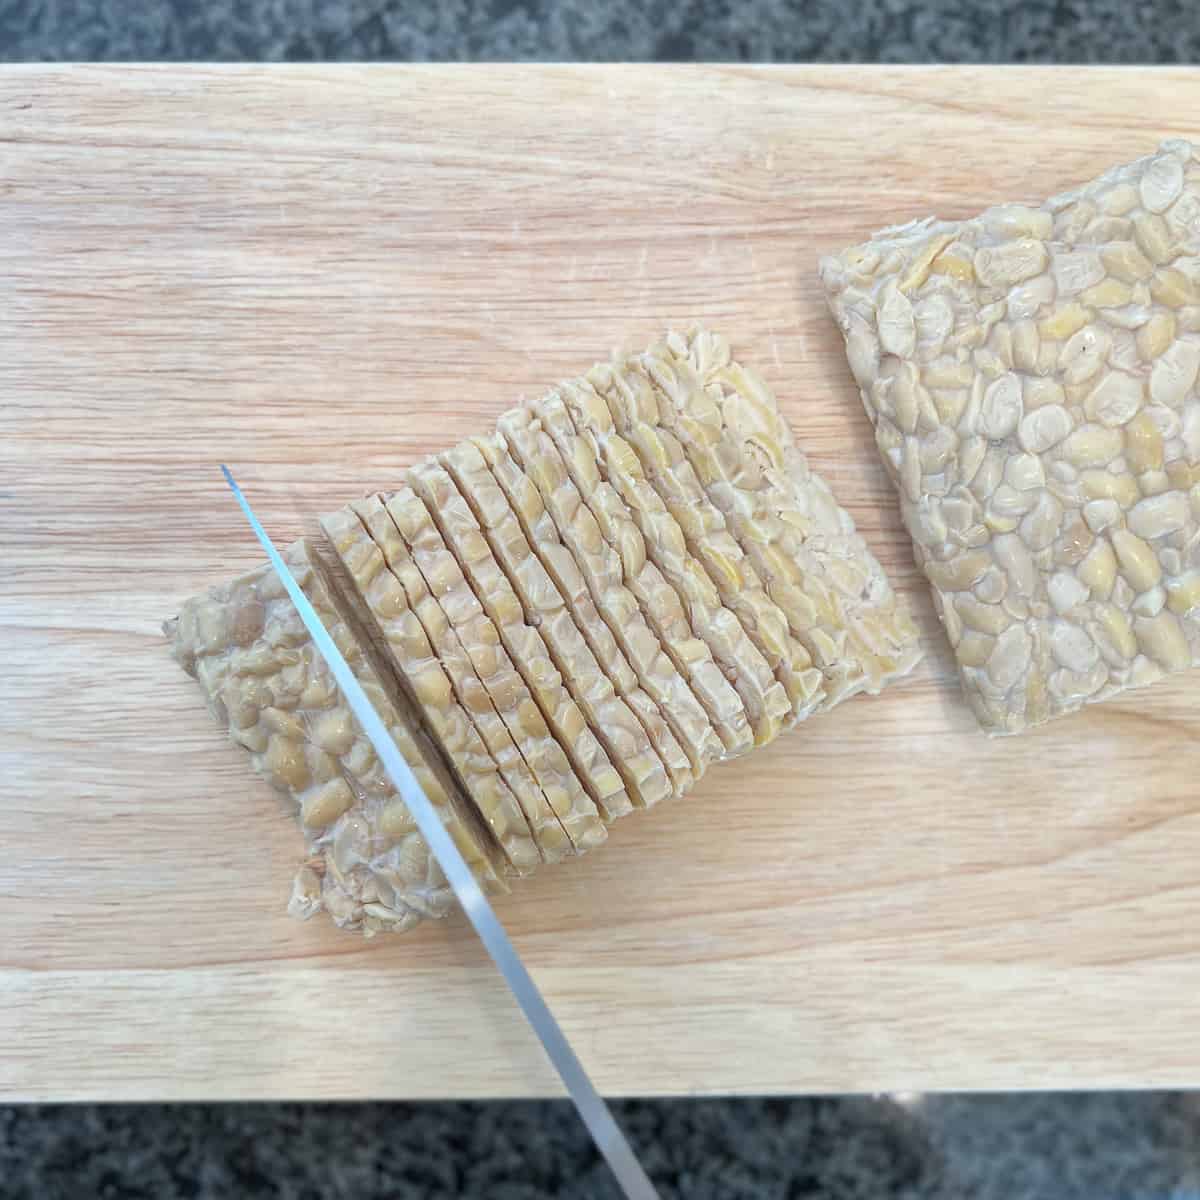 a tempeh block being sliced into bacon strips with a knife on a wooden cutting board